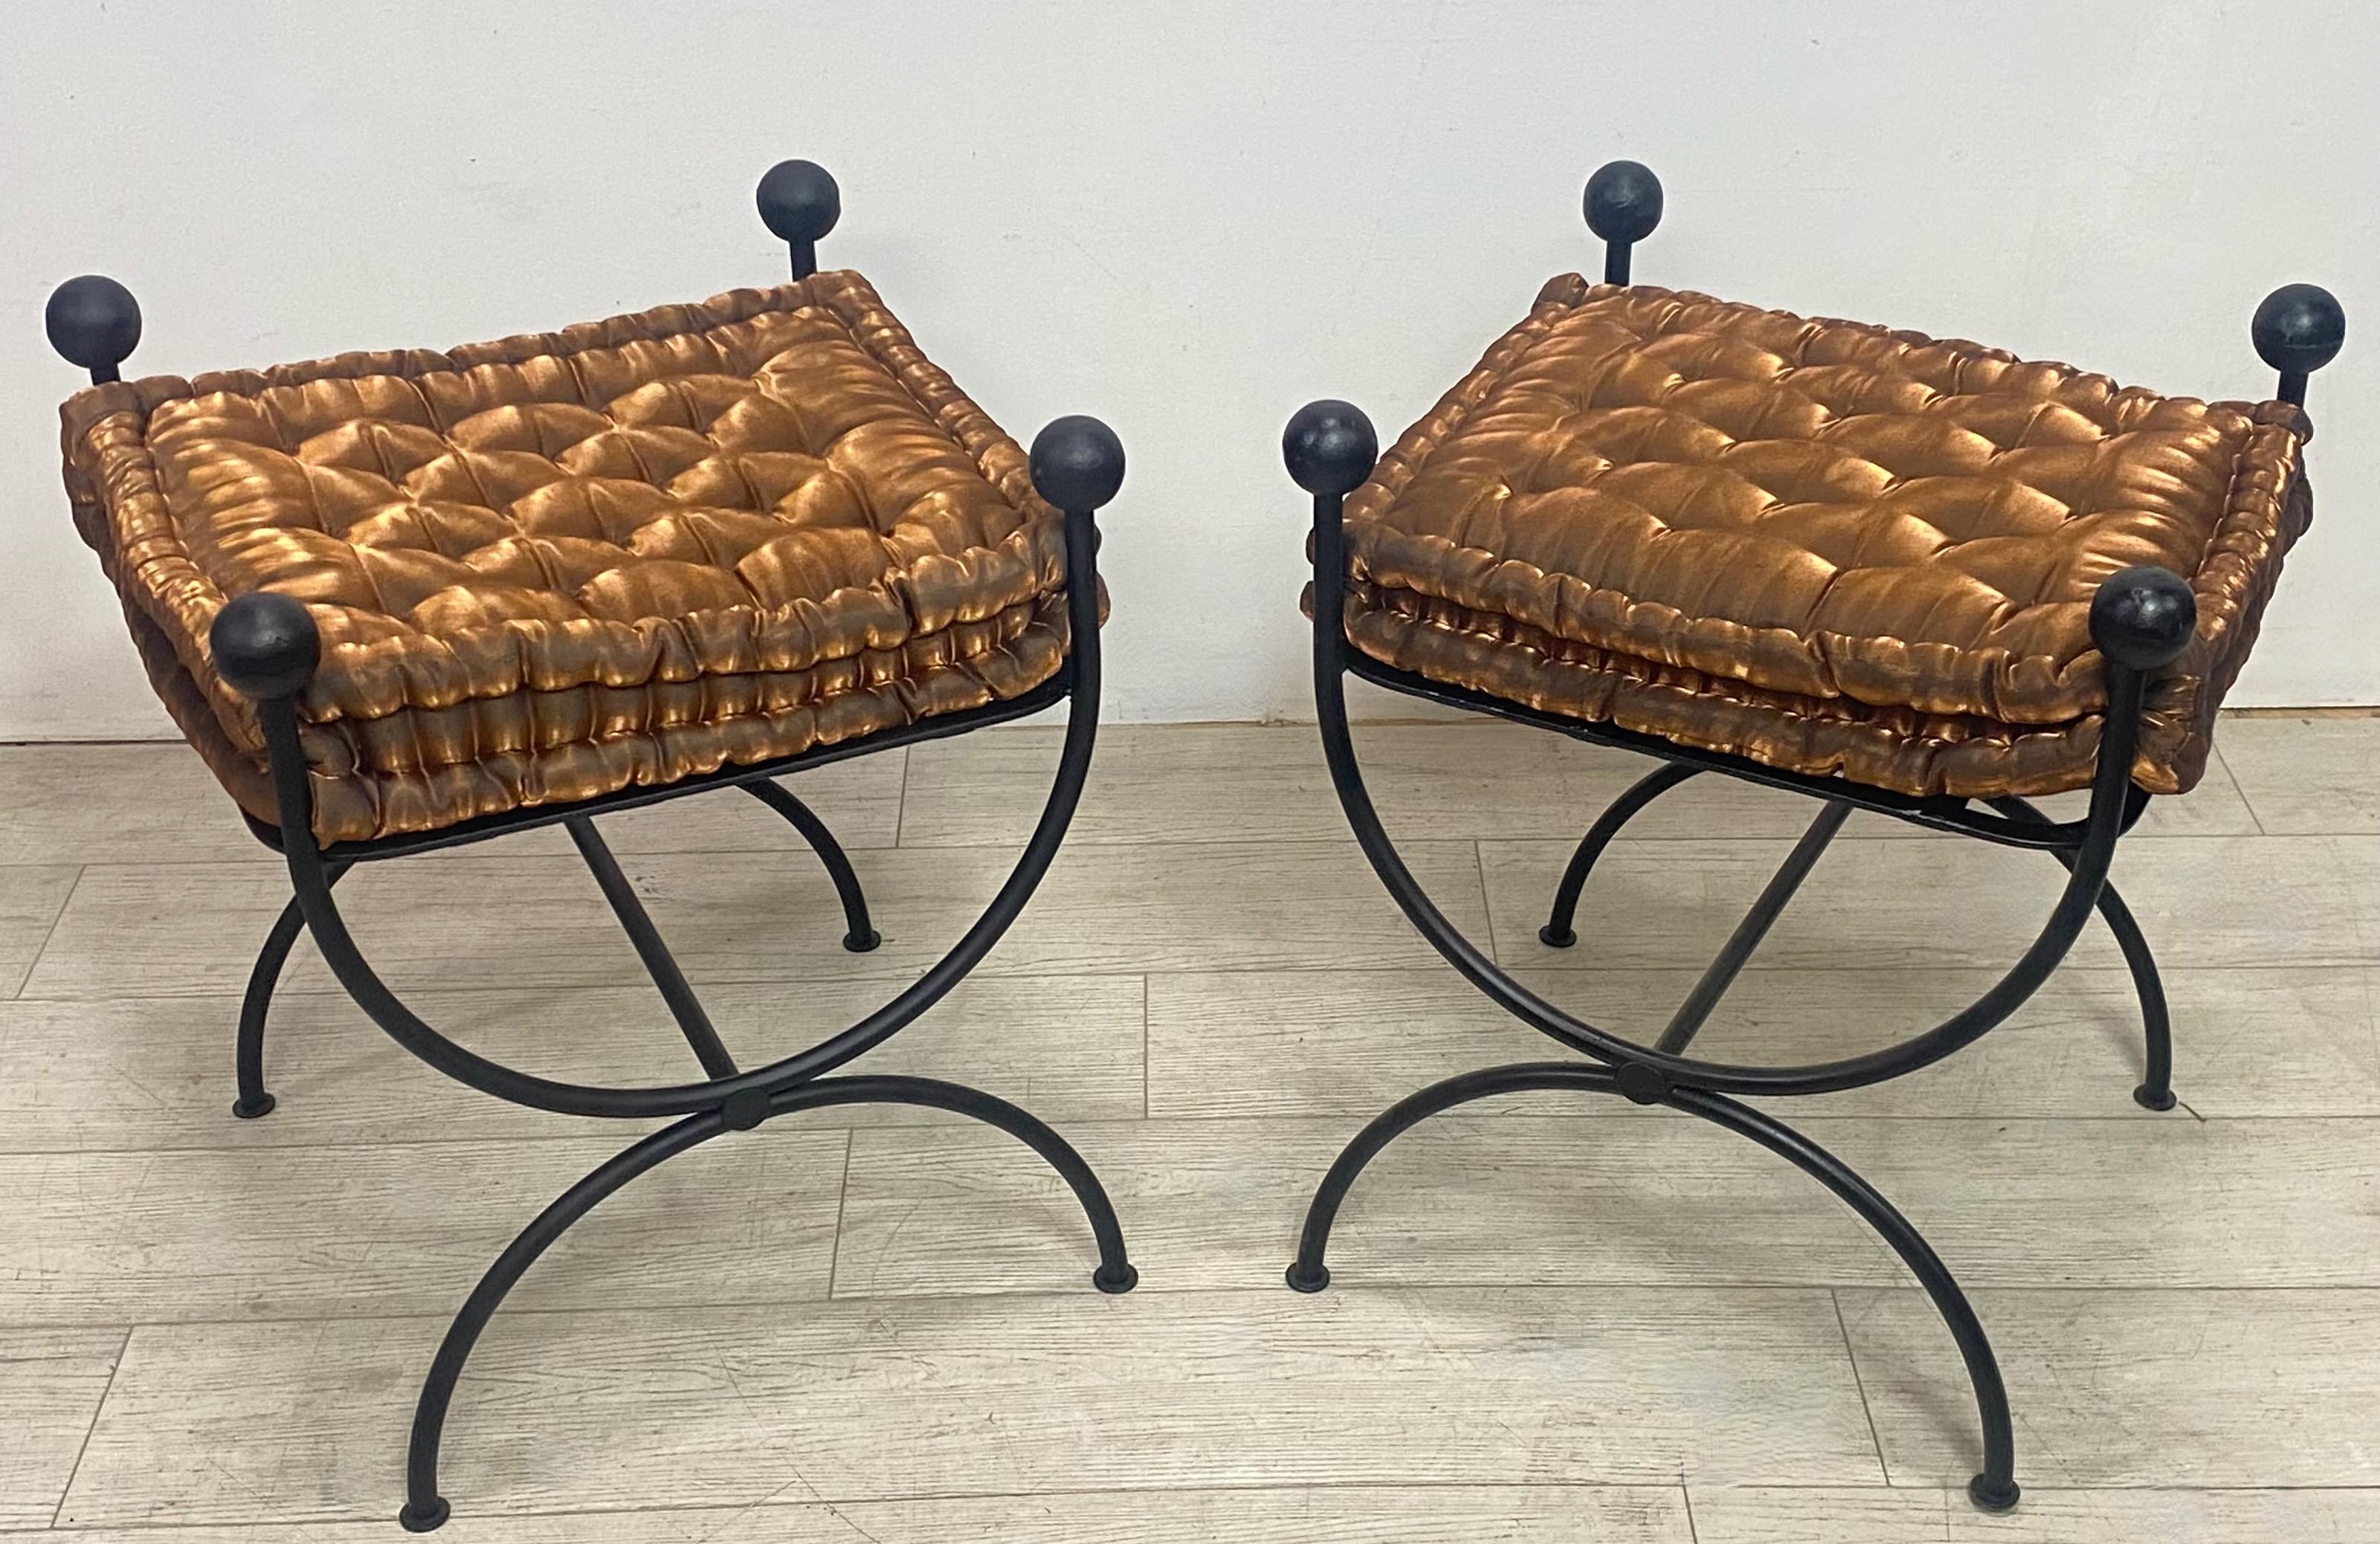 A stylish pair of iron stools or benches with copper luster fabric cushions.
Iron work recently repainted with satin black enamel.
1960's-1970's



.